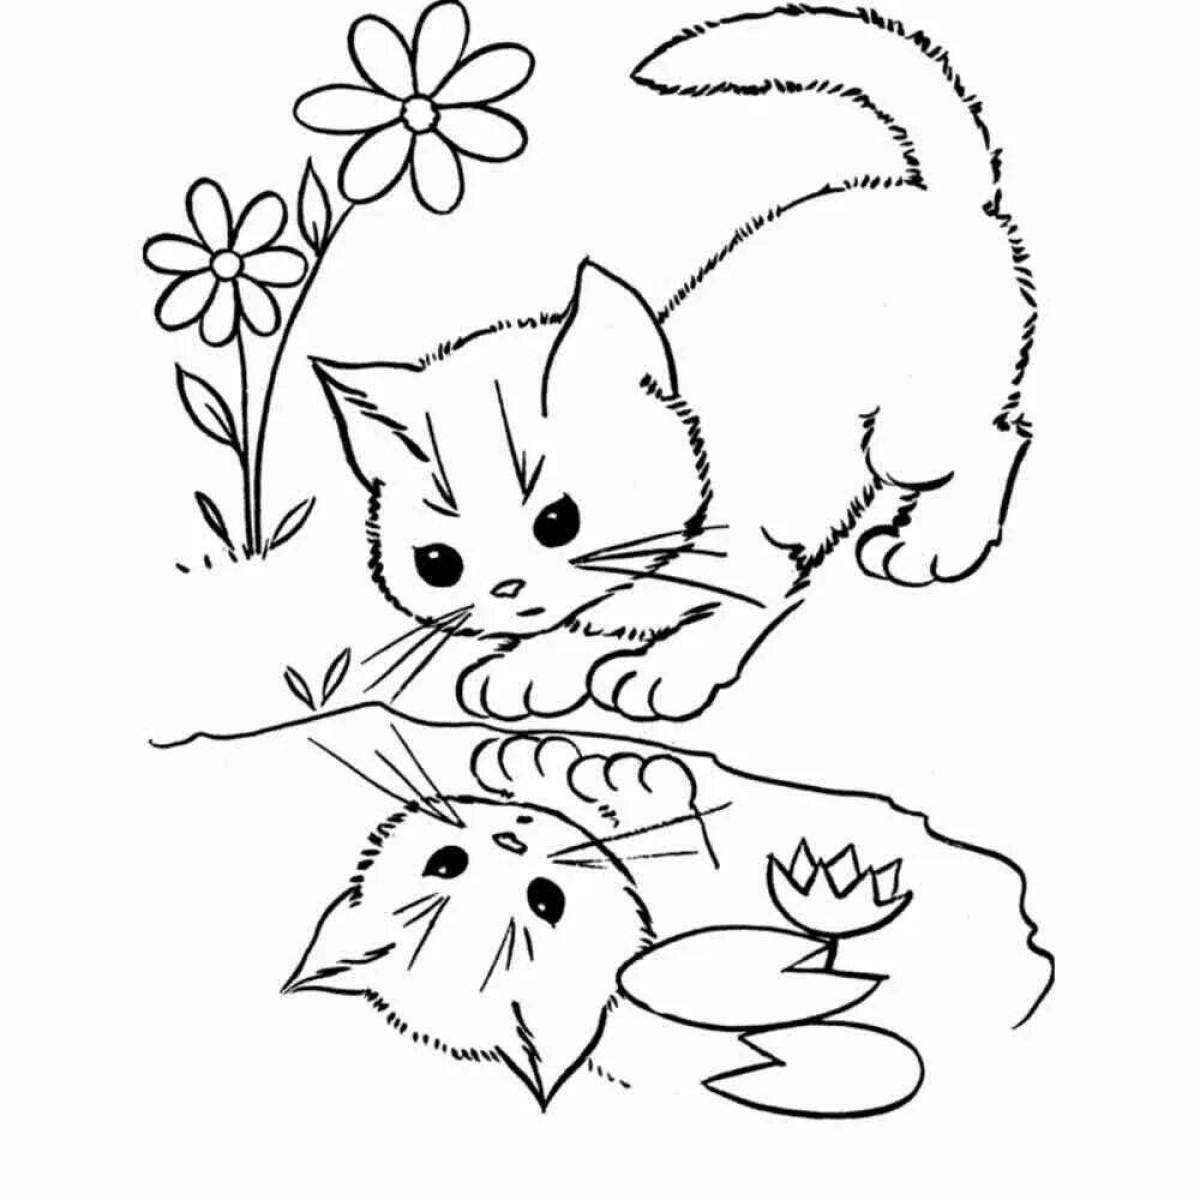 Precious kittens coloring page